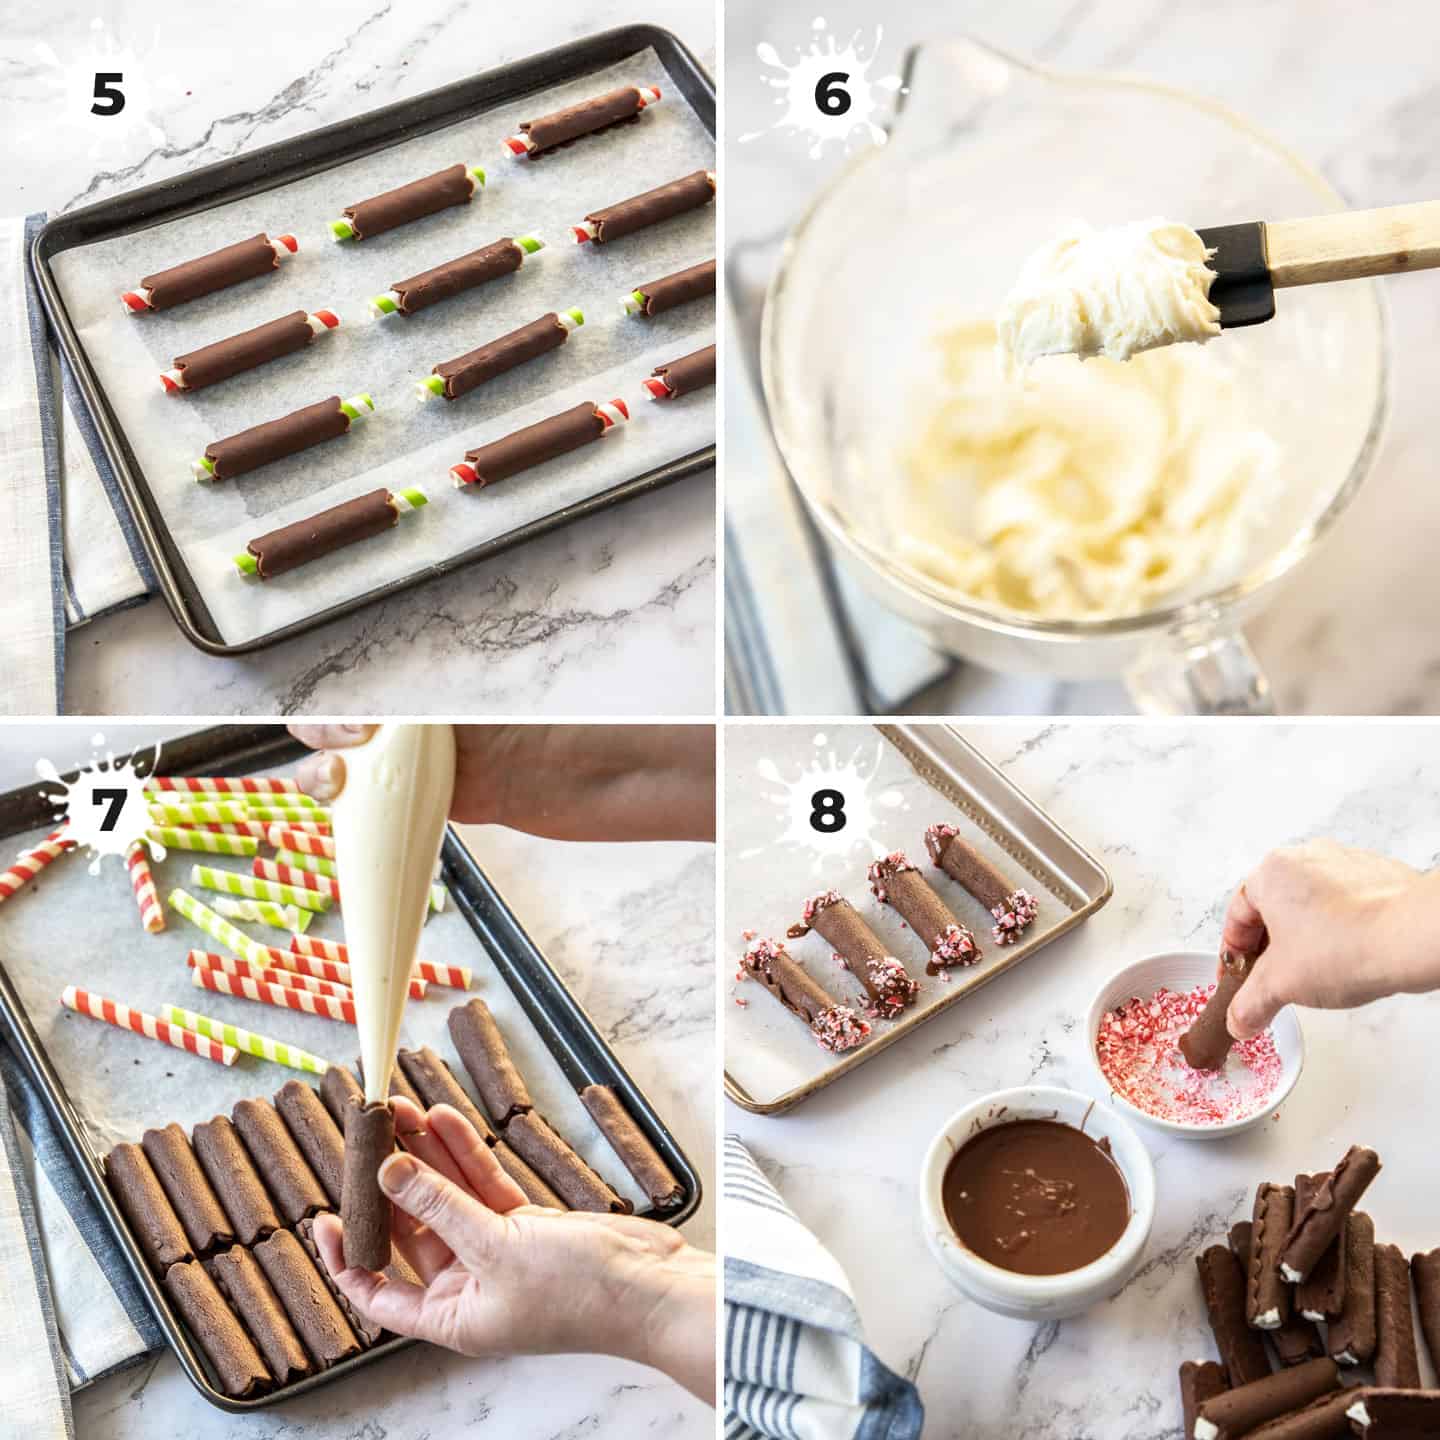 A collage of 4 images showing how to fill and decorate the cookies.